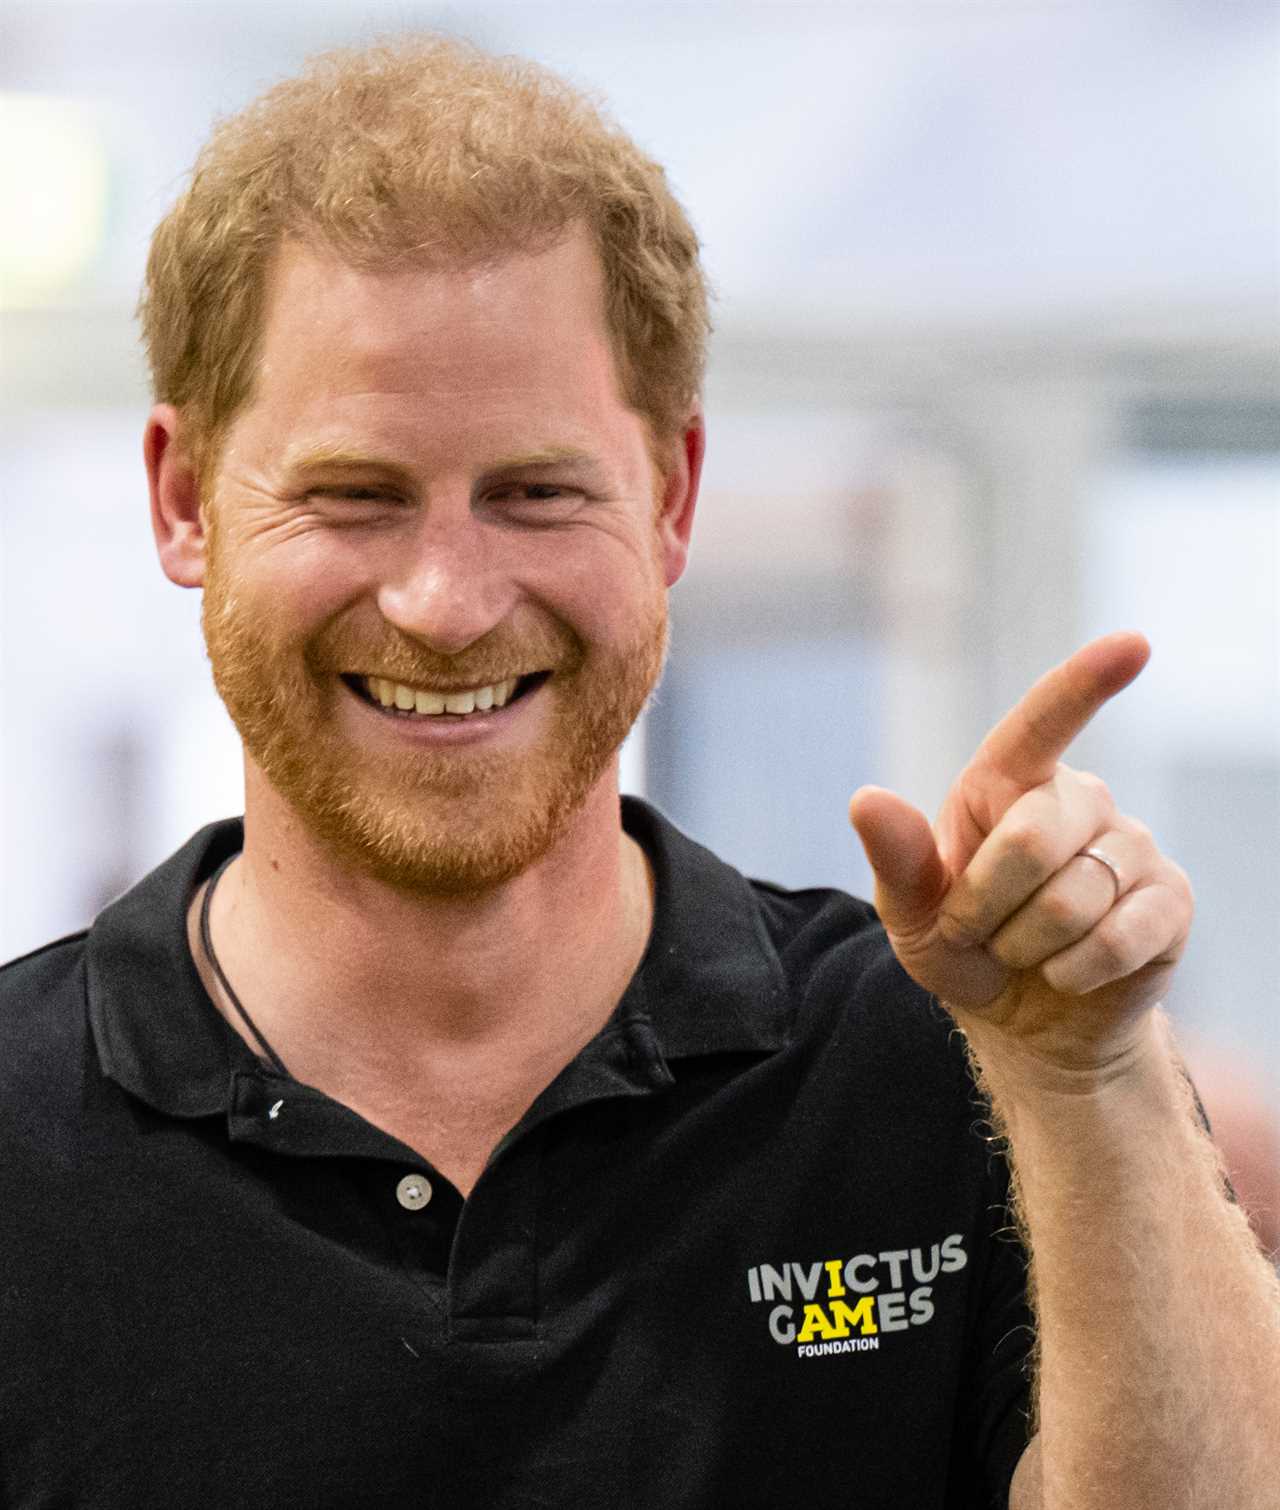 Prince Harry's Racy Christmas Present to the Queen